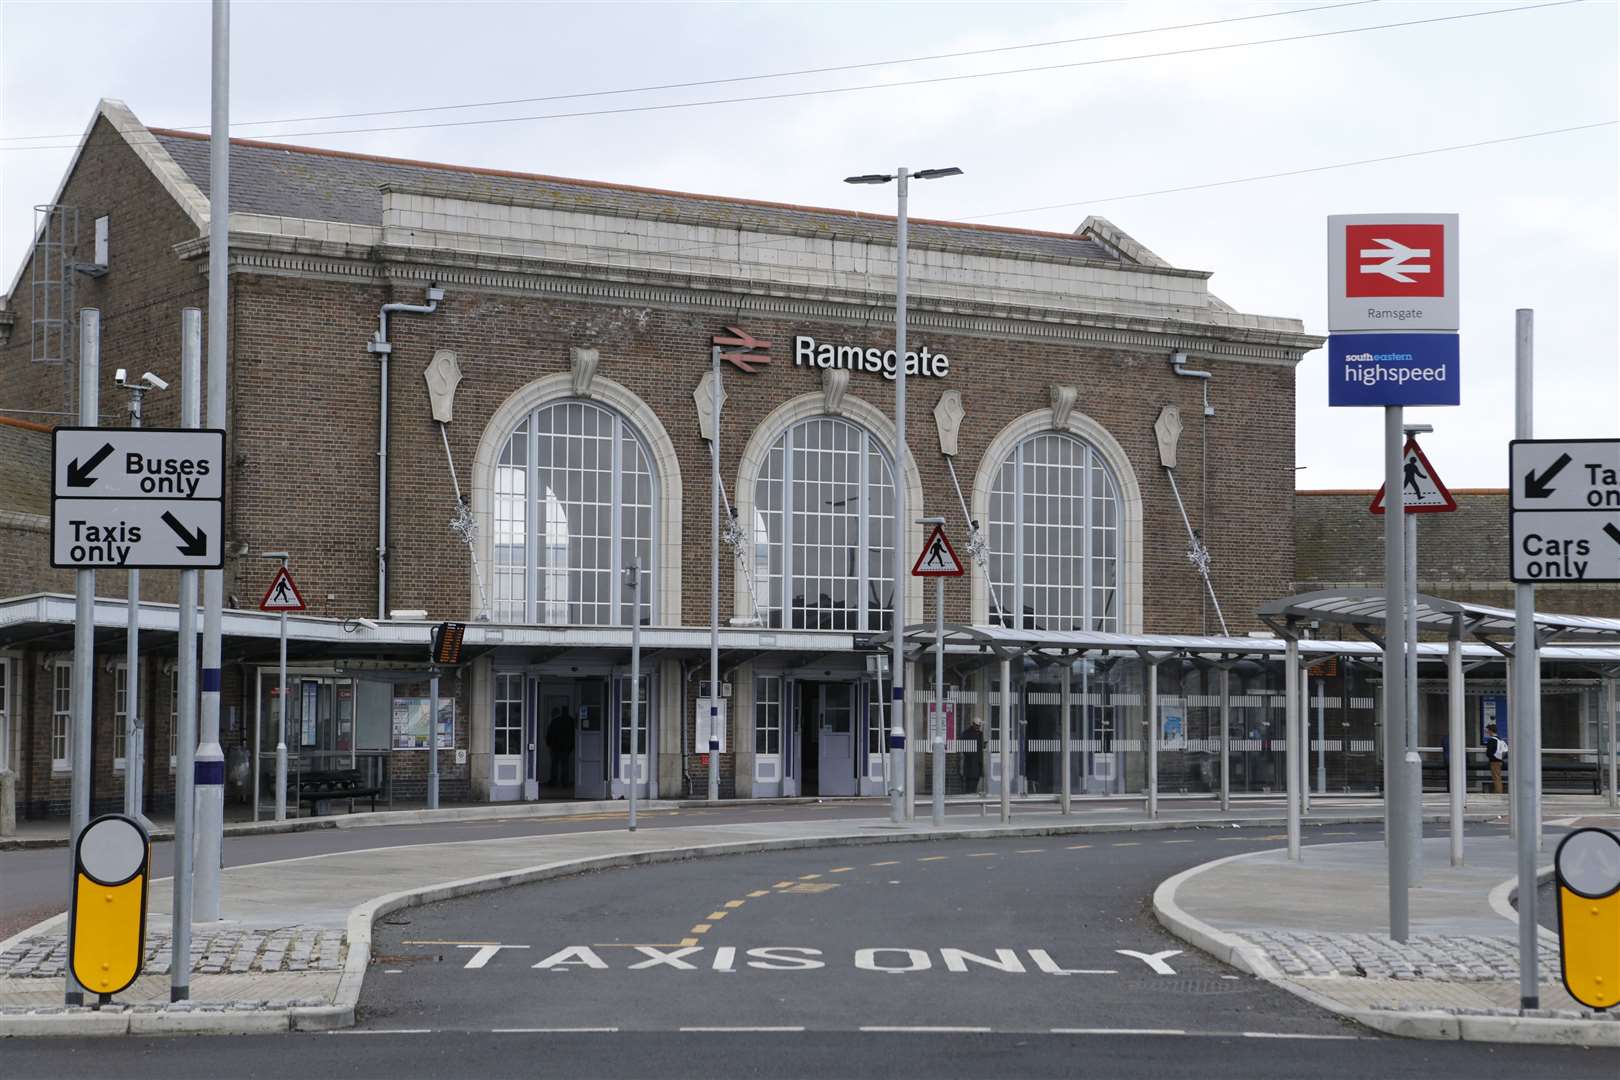 The attack happened near Ramsgate train station